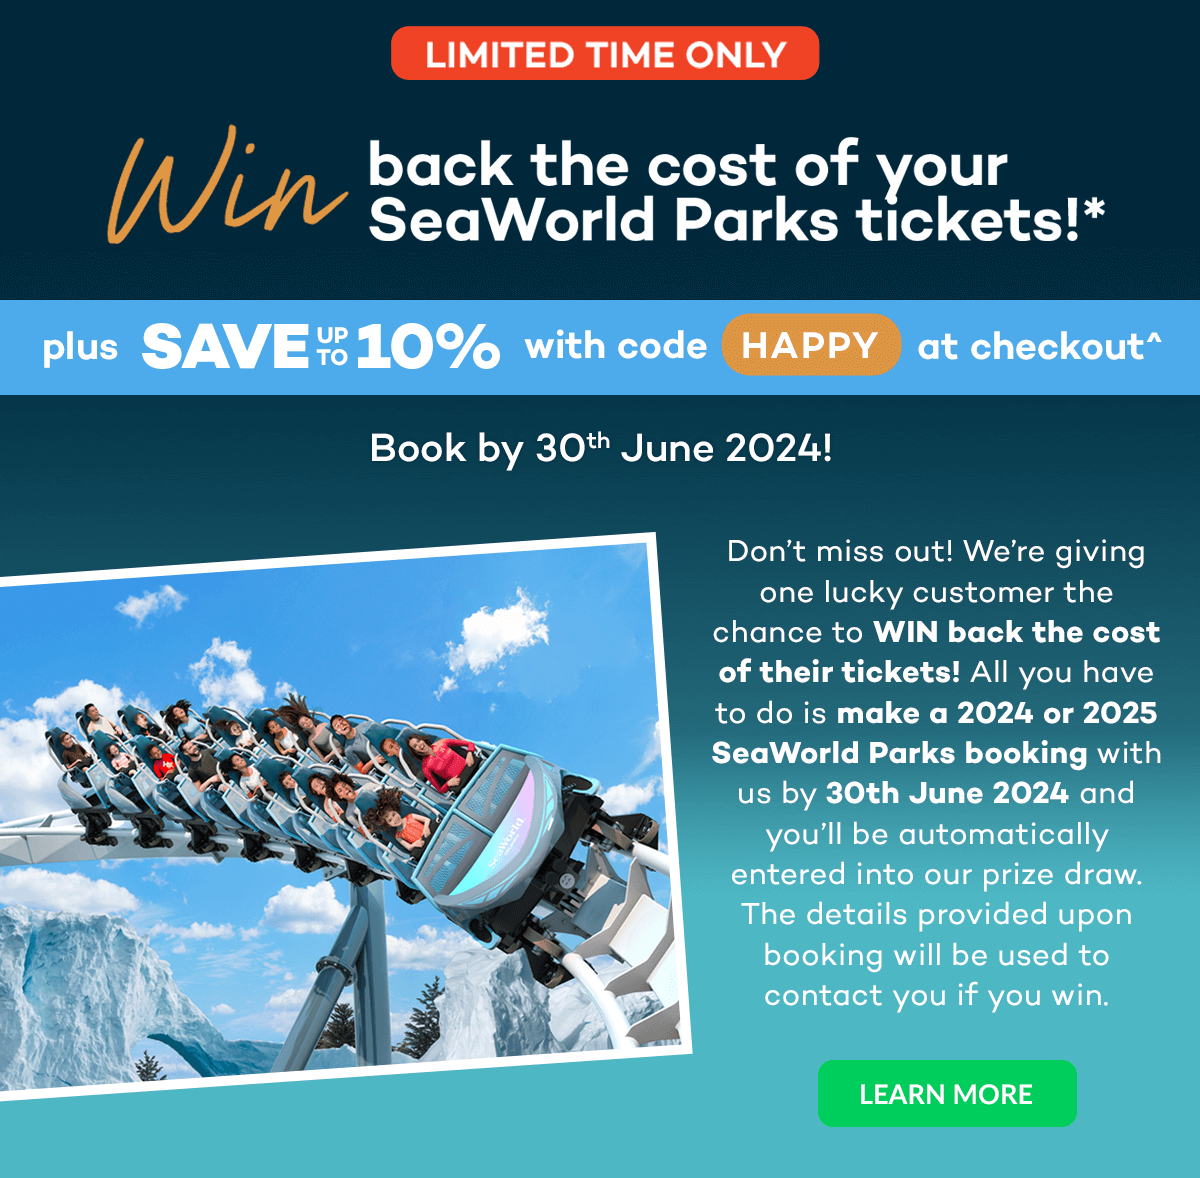 WIN back the cost of your SeaWorld Parks tickets!*